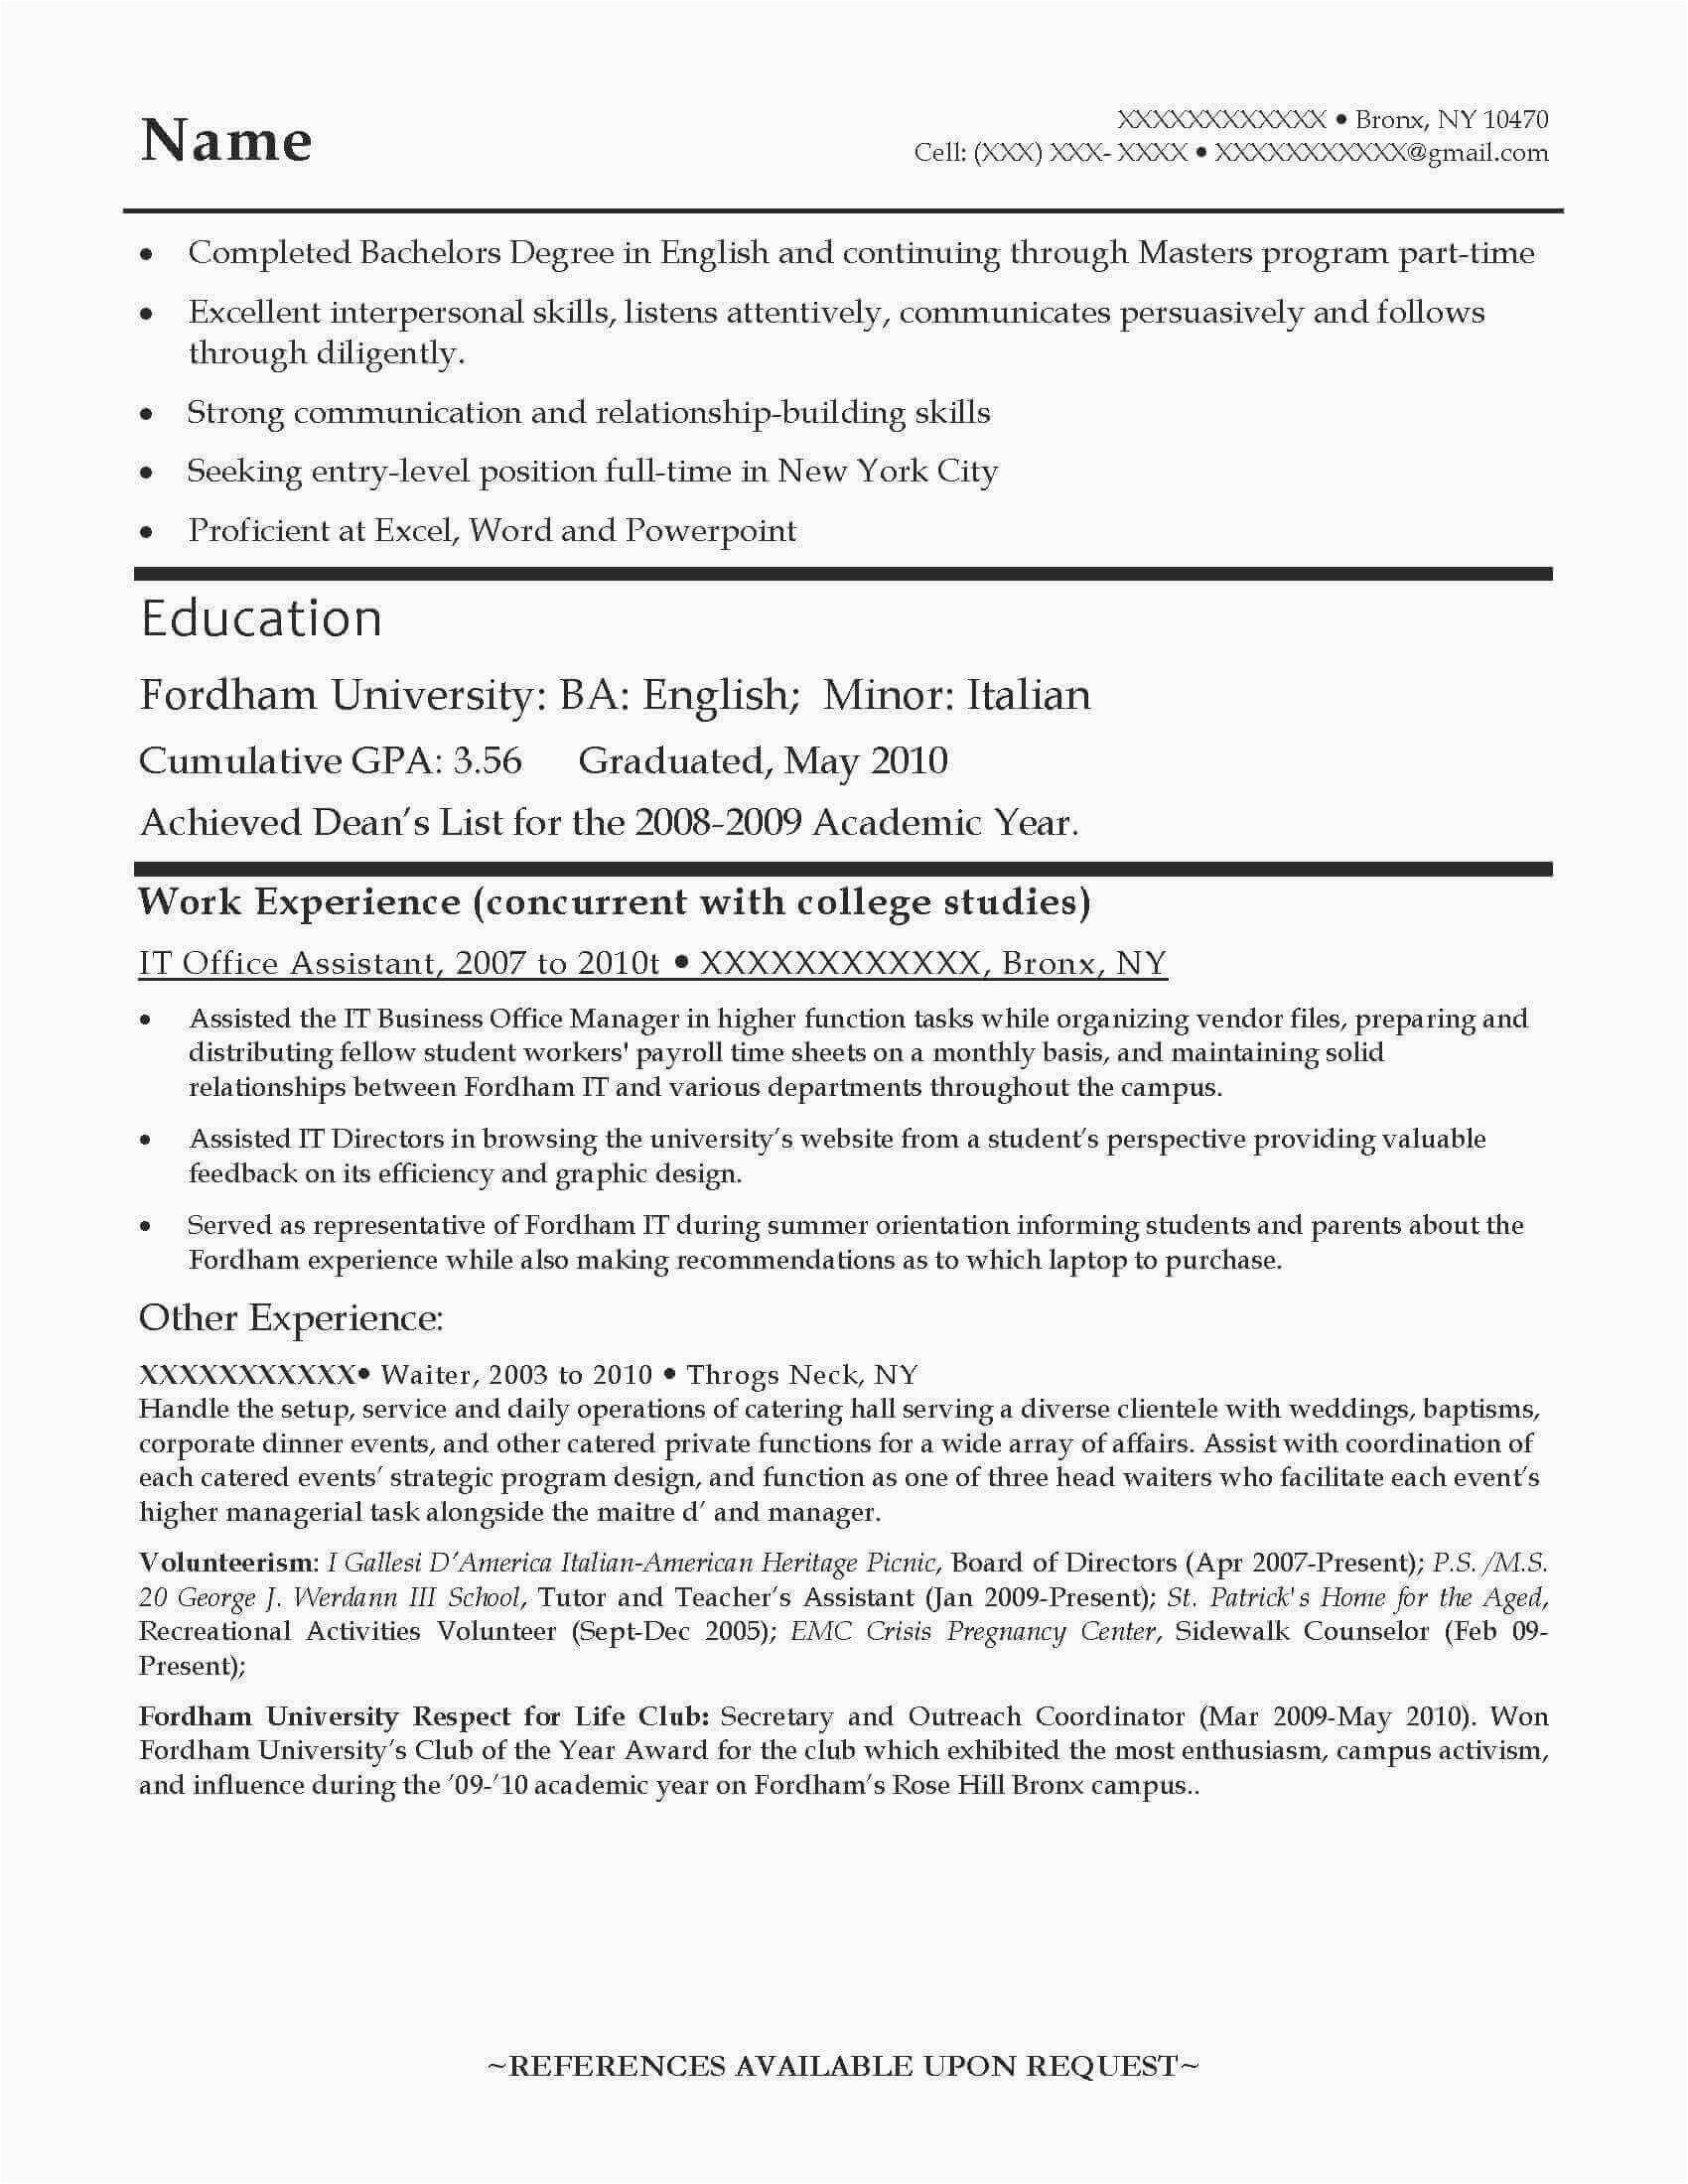 Sample Resume for All Types Of Jobs Good Resume Examples for All Careers